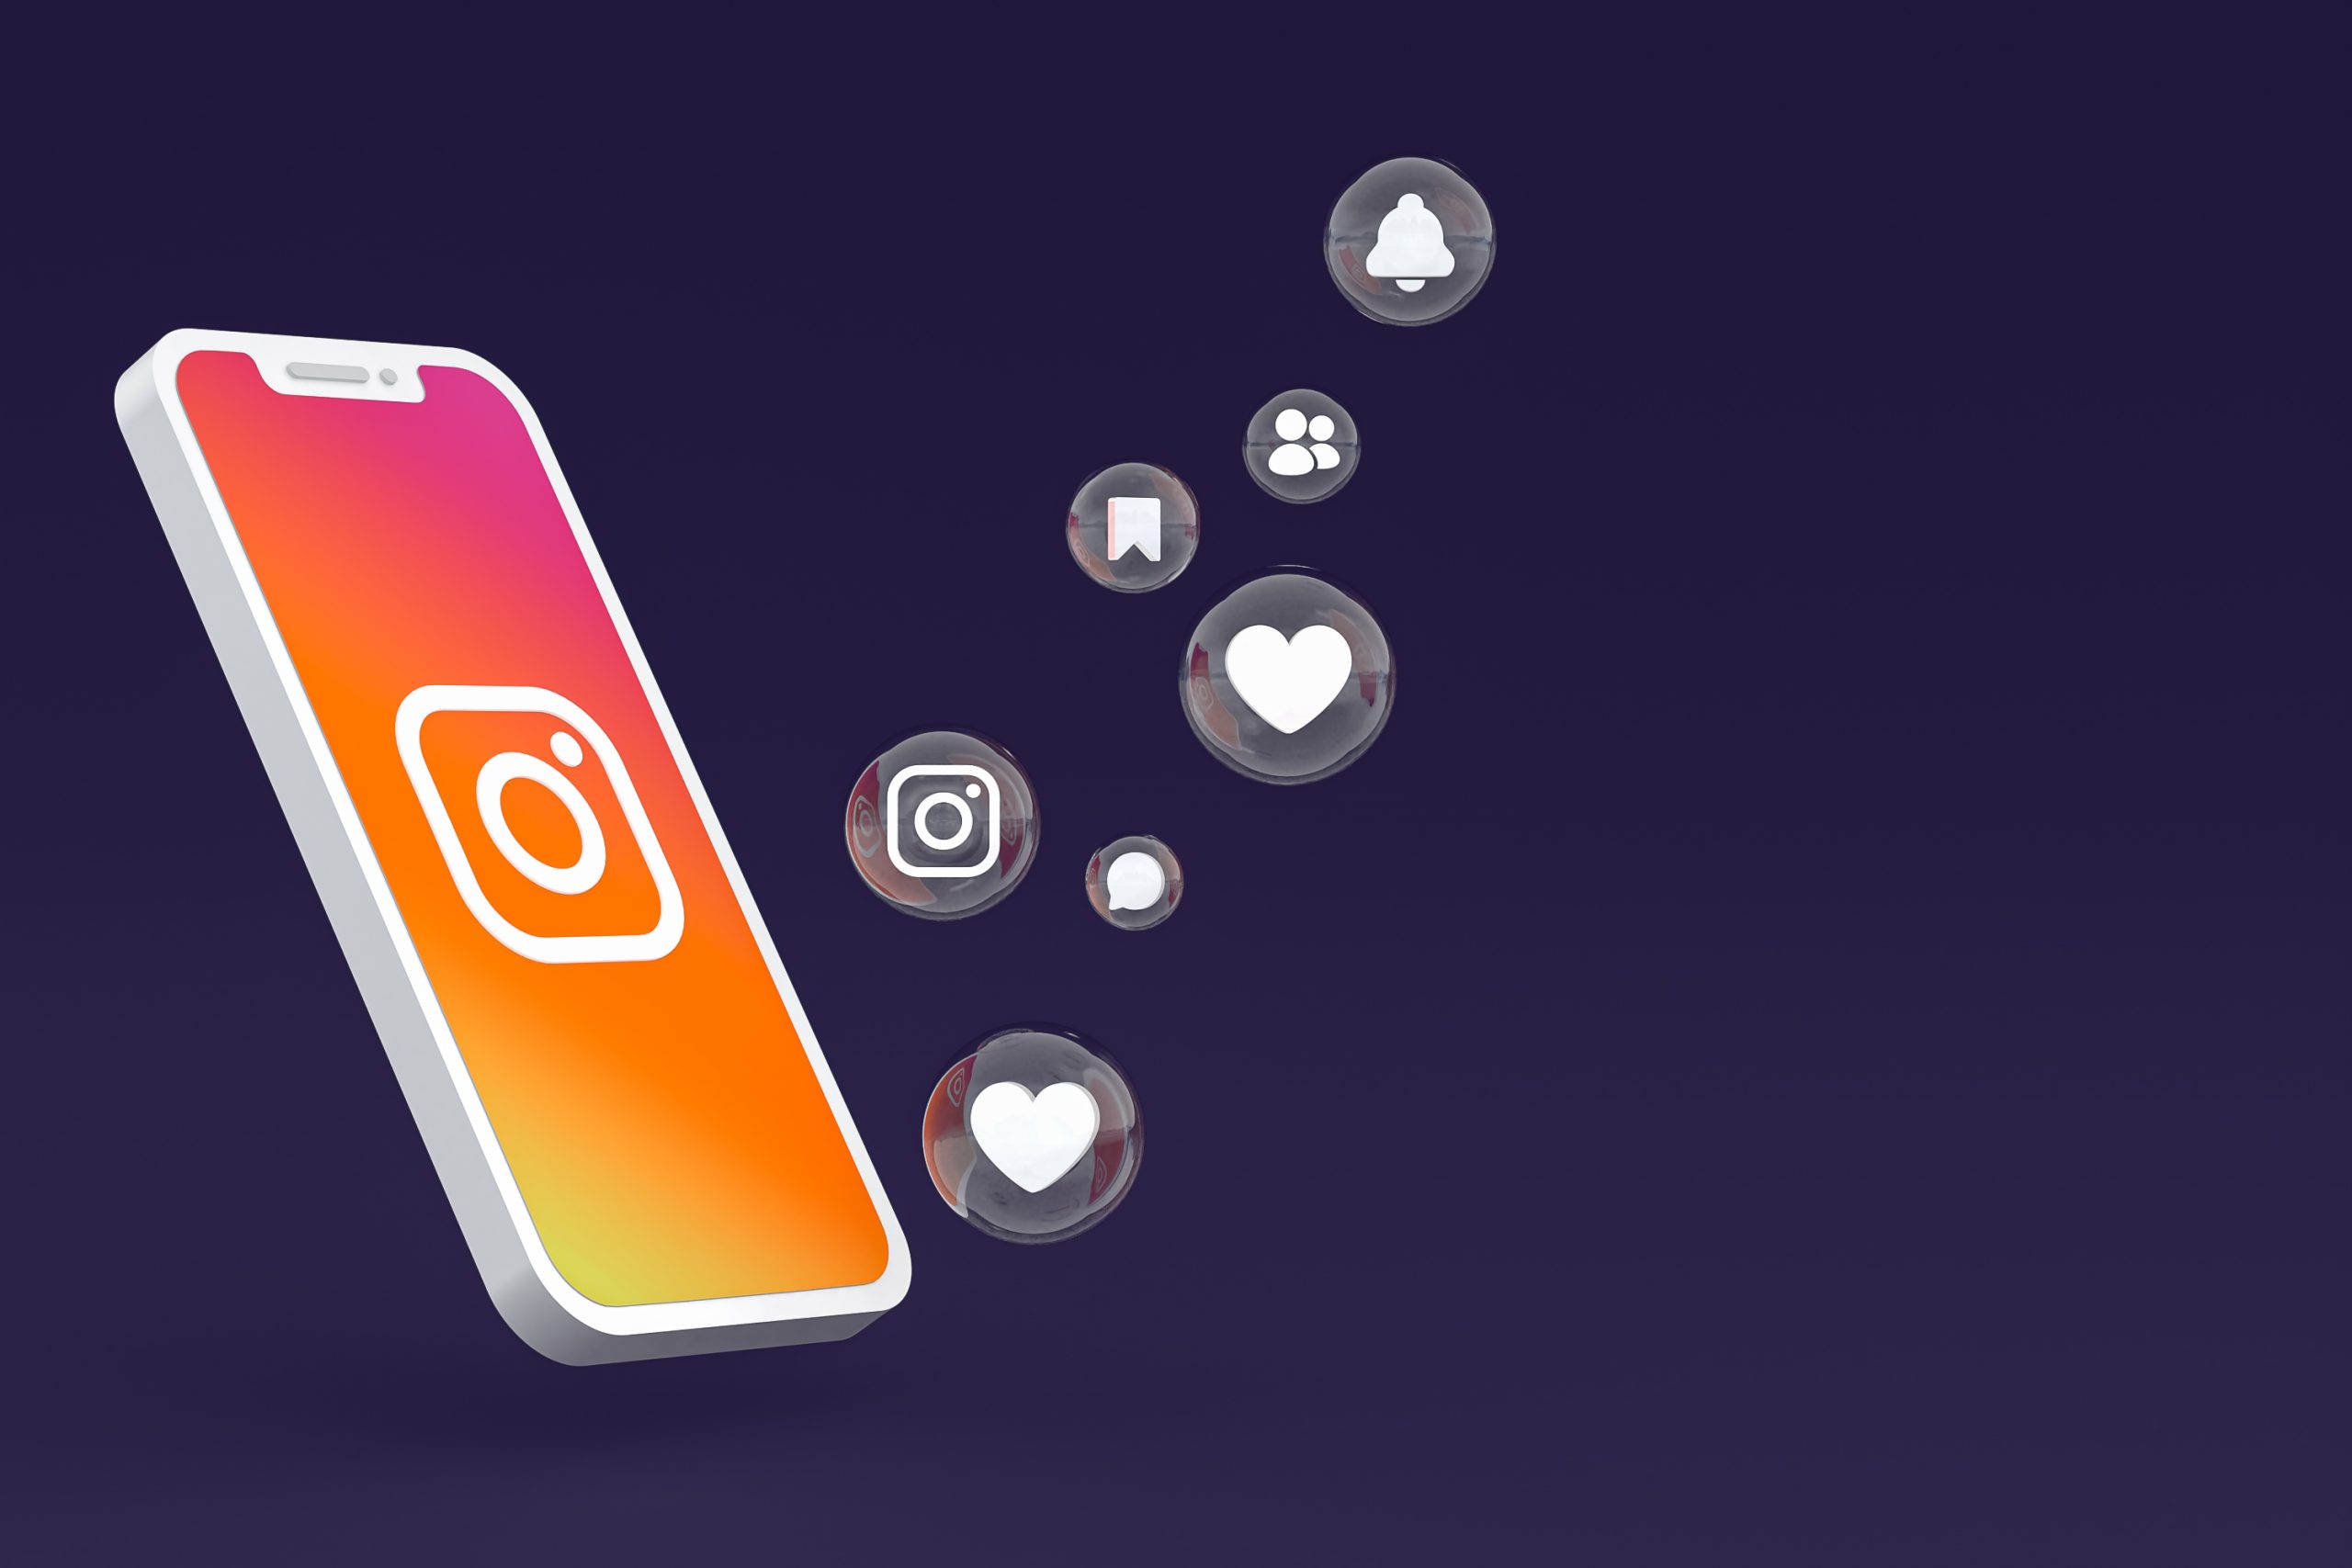 Instagram Shifts Gears with Chief’s Vision for 2023